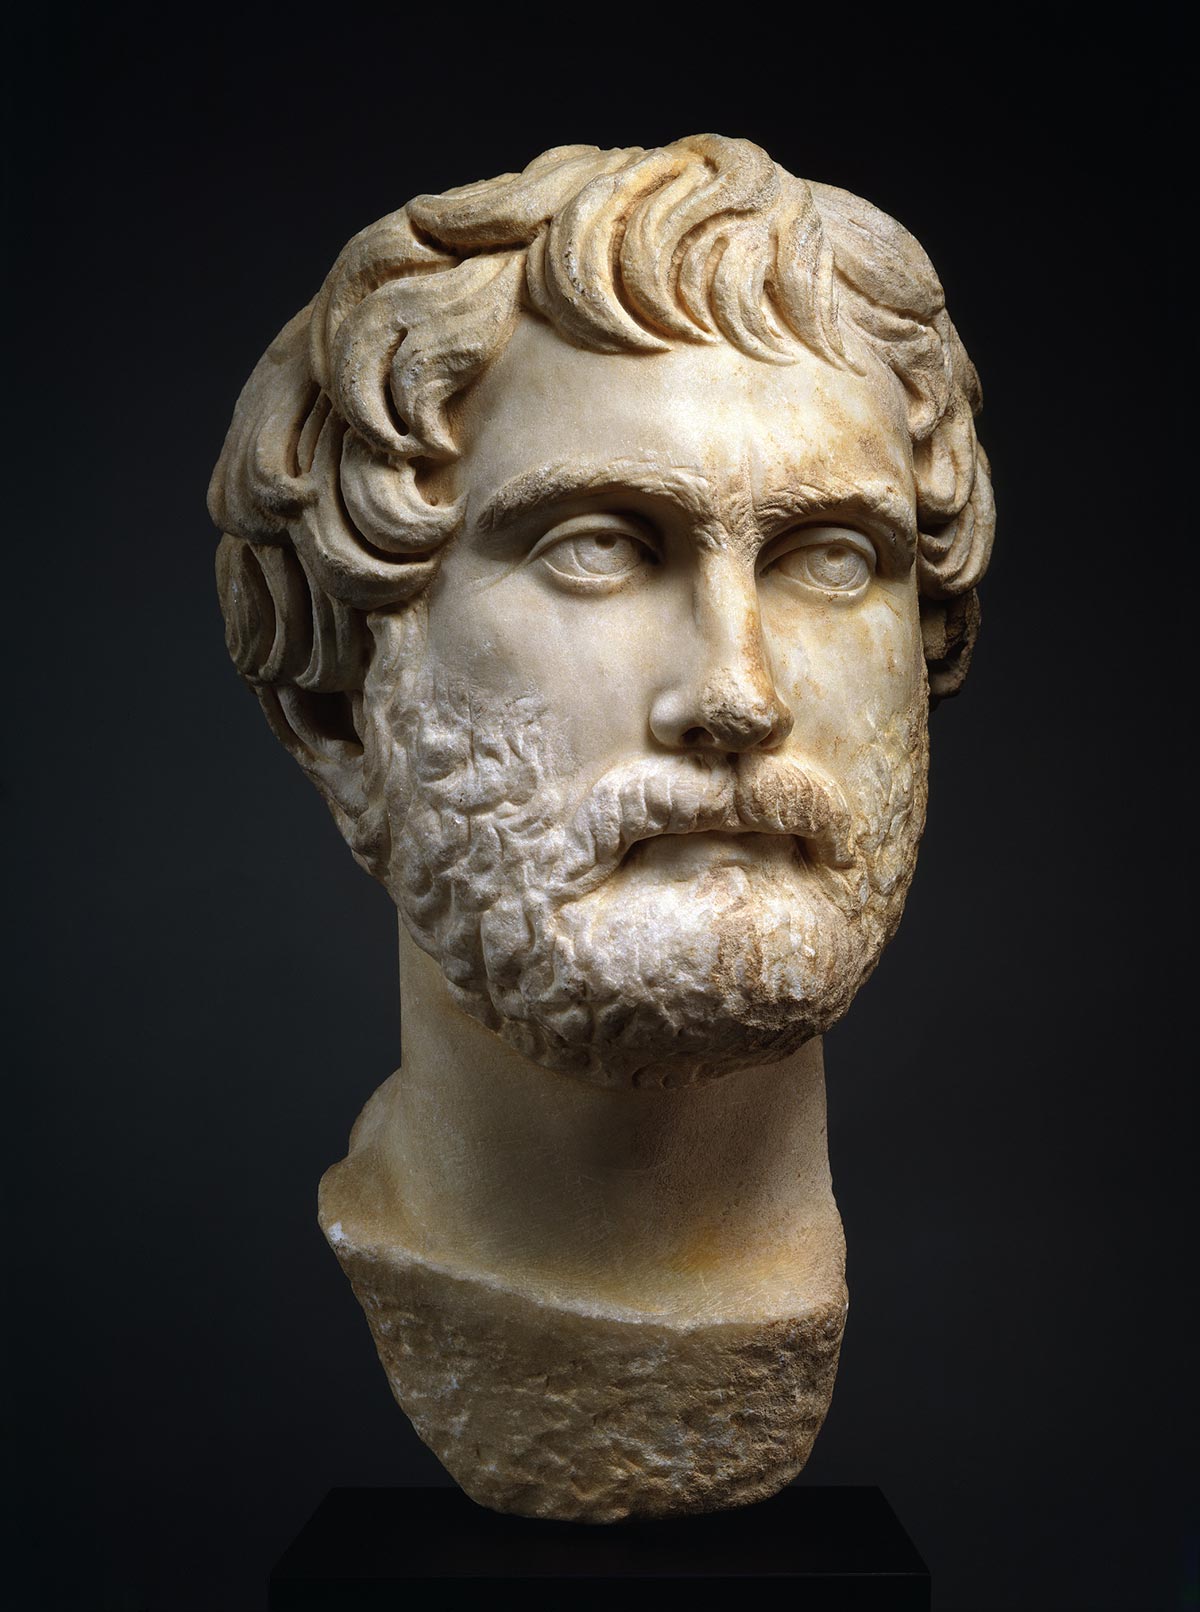 Marble bust of a man with a beard and short curly hair